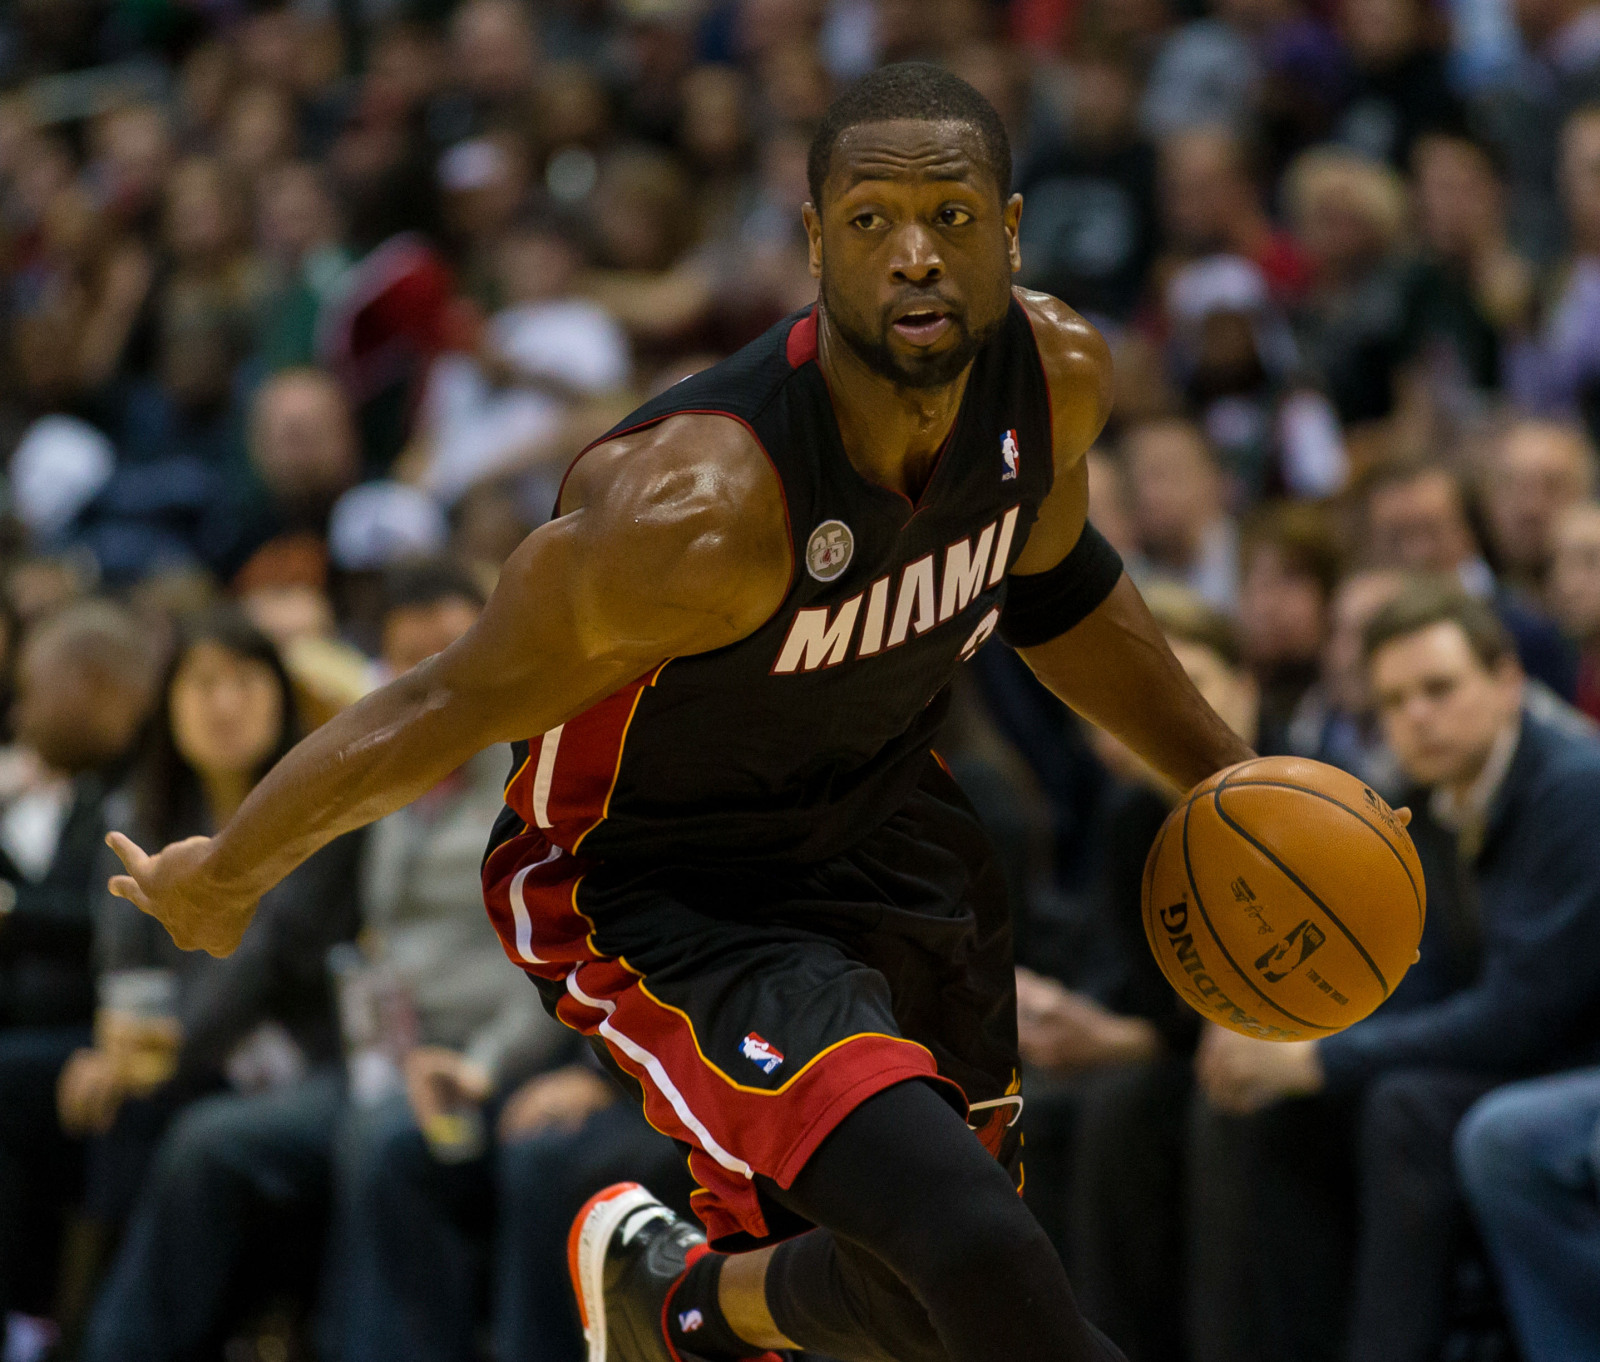 Ranking Dwyane Wade's championships in order of difficulty level